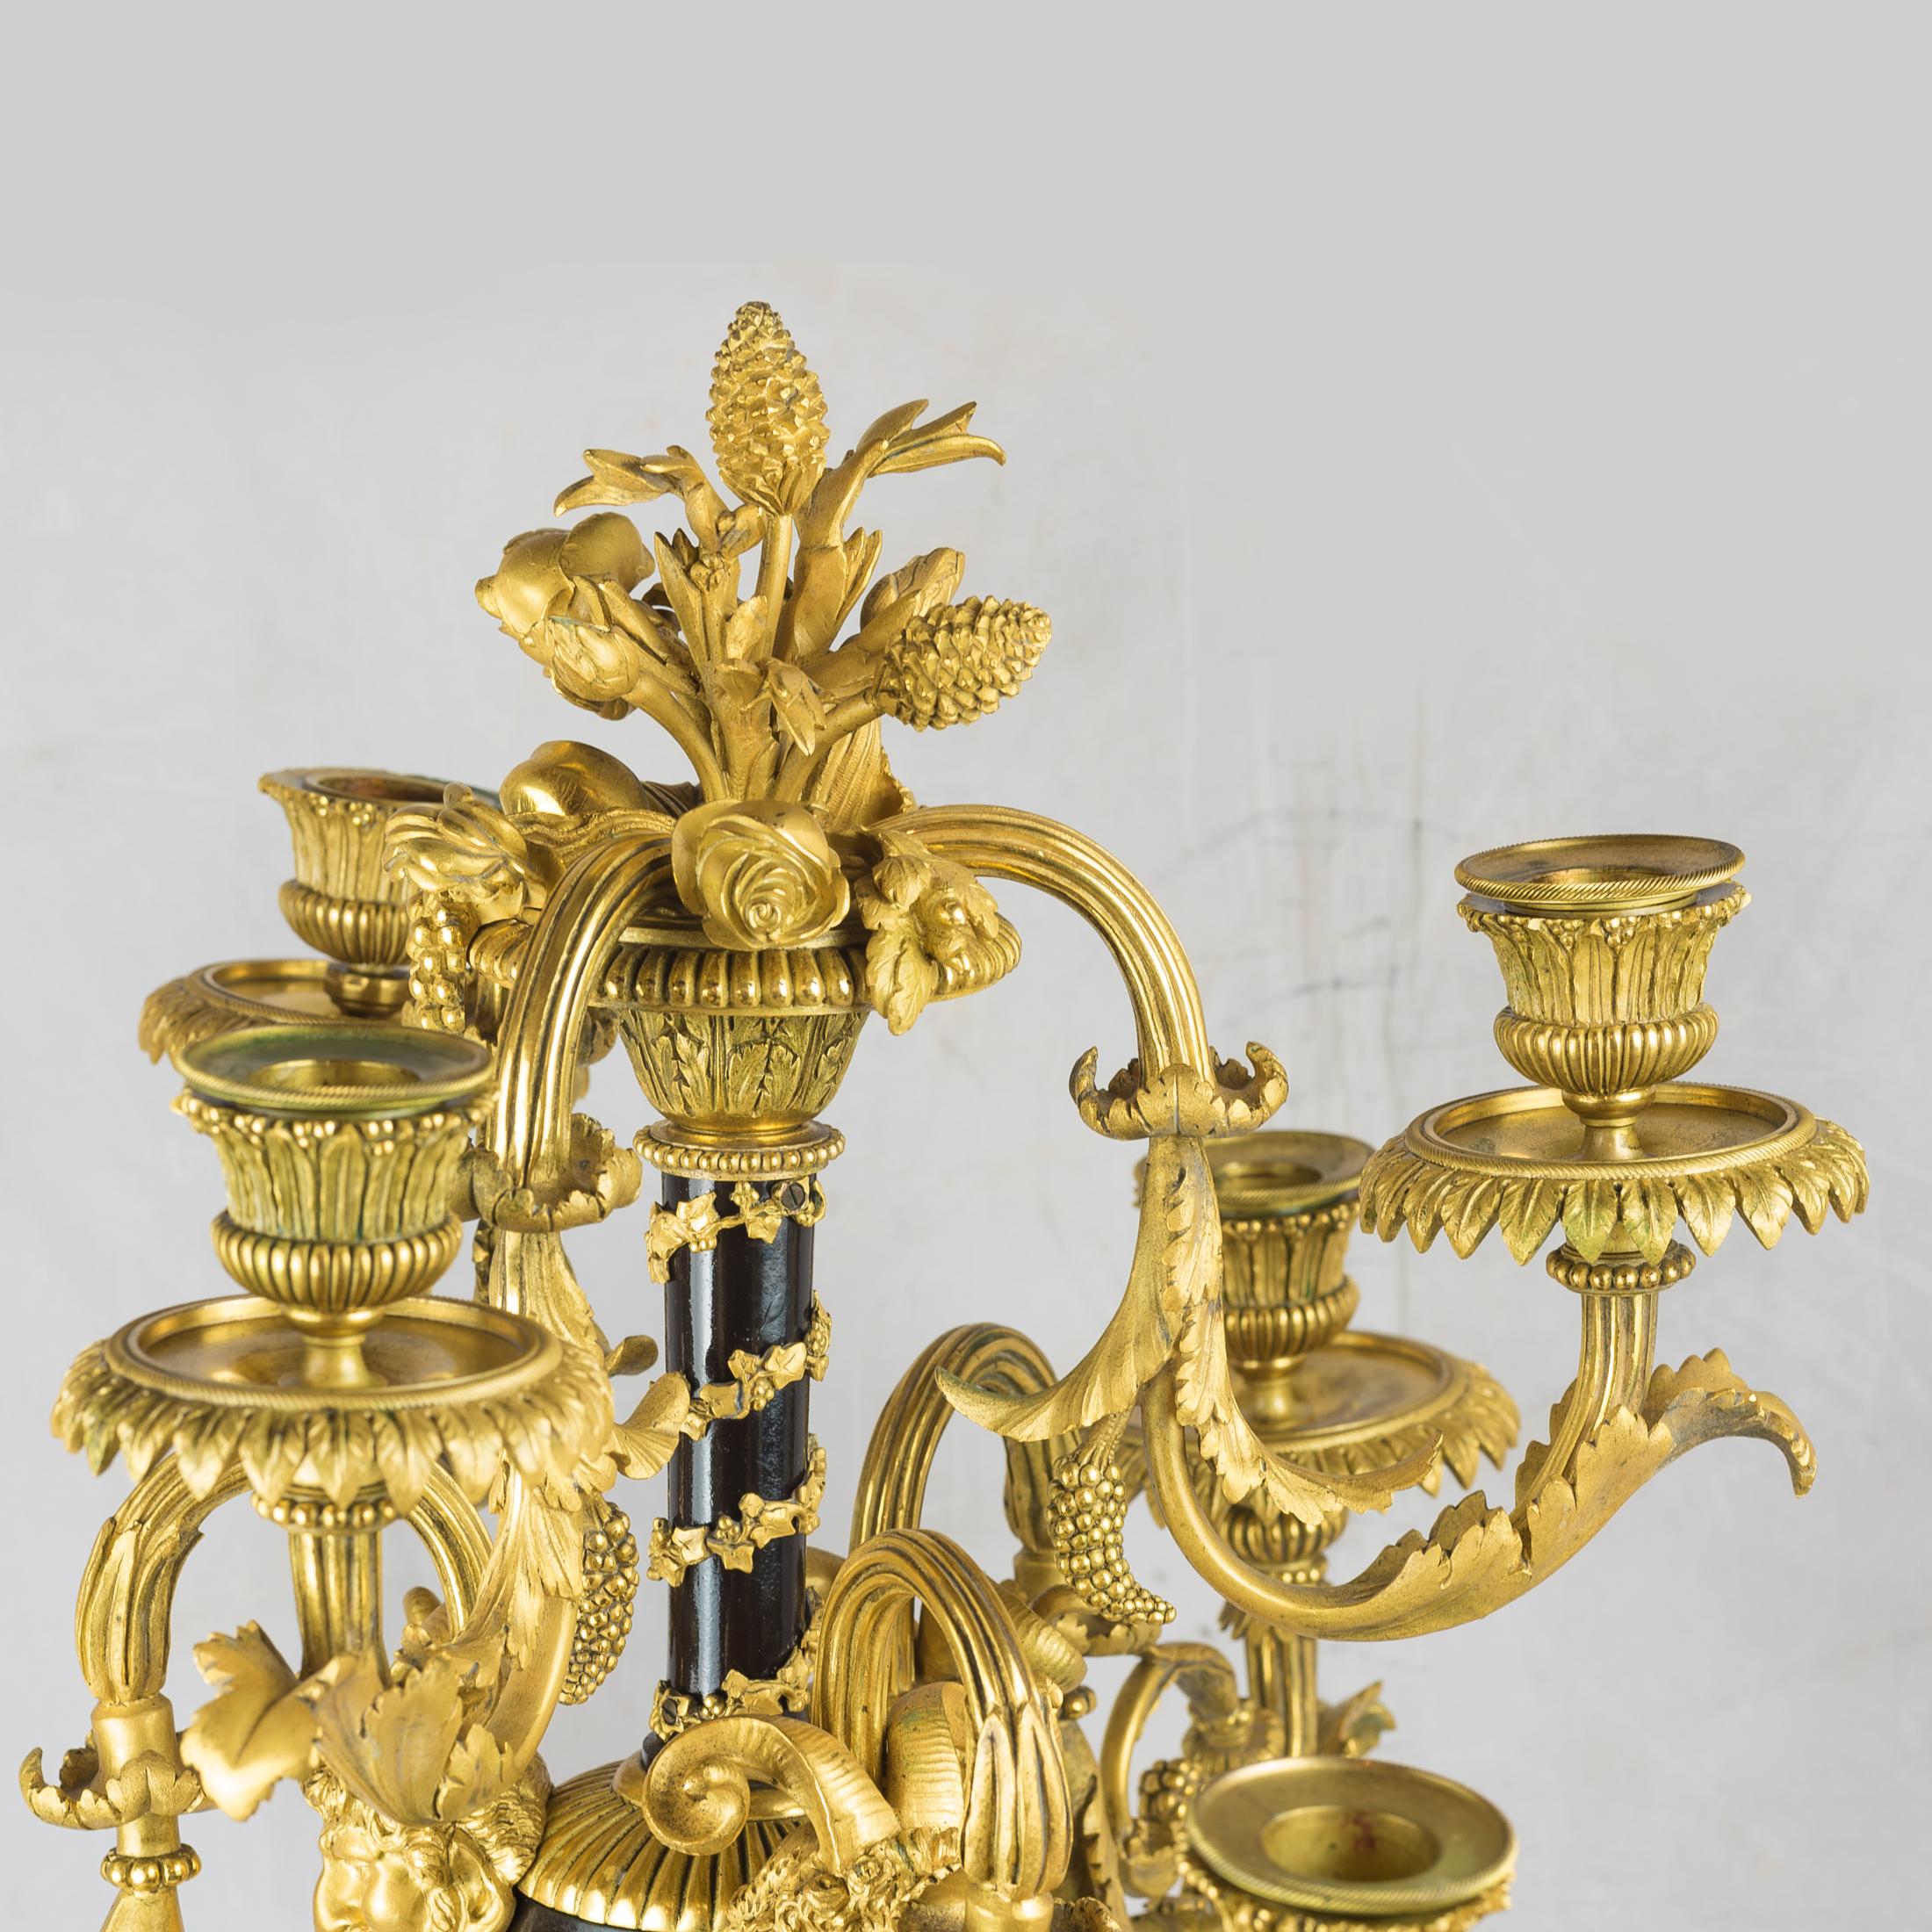 19th Century Pair of Napoleon III Gilt-Bronze Six-Light Candelabras Attributed to Beurdeley For Sale